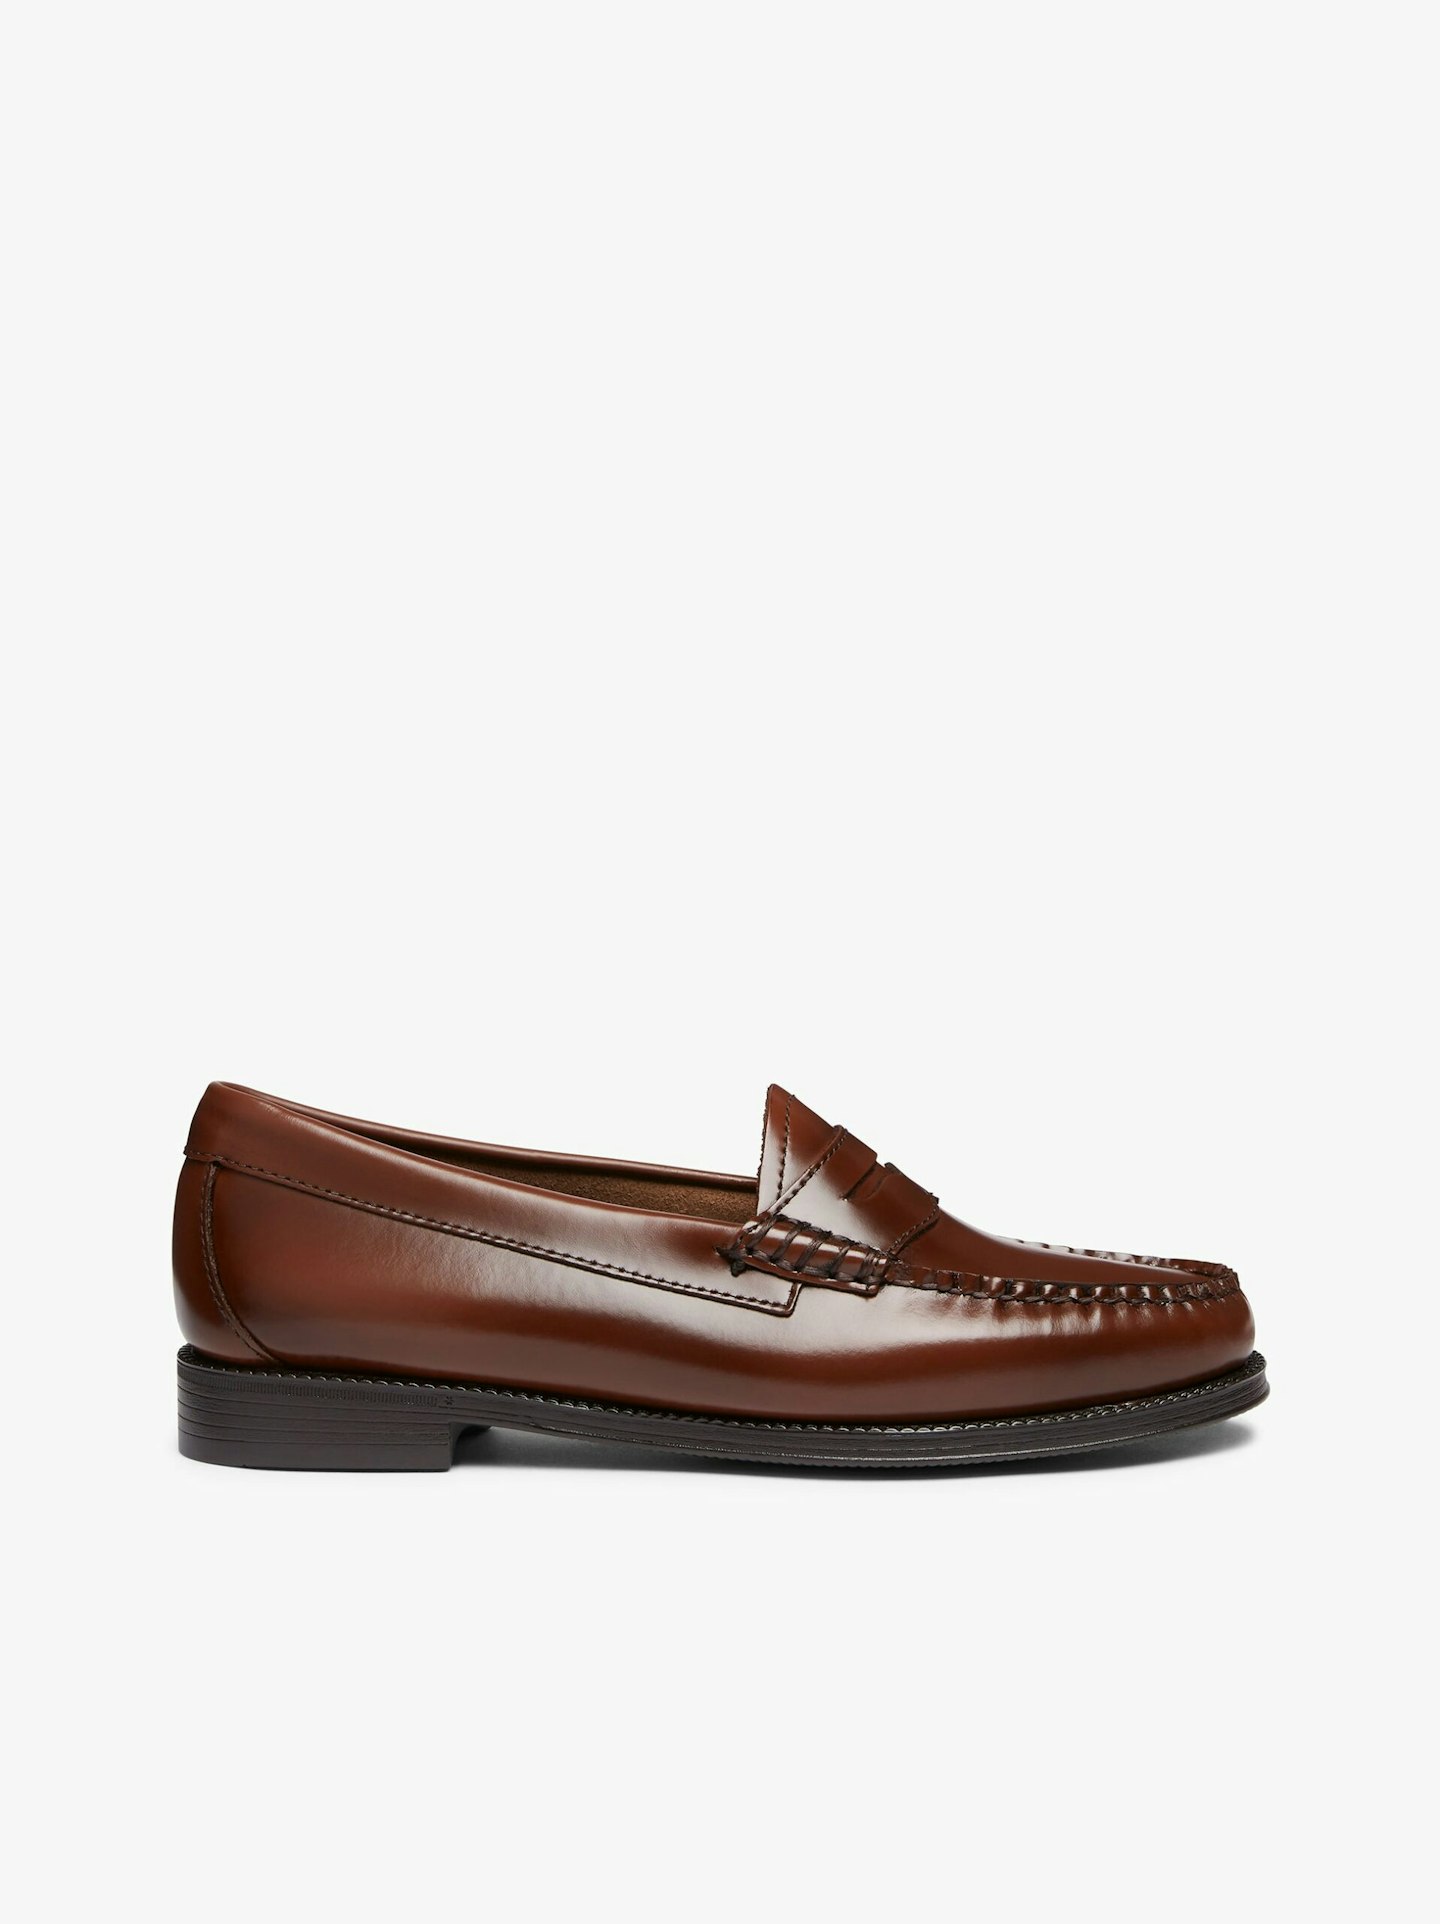 GH Bass & Co, Easy Weejuns Penny Loafers Cognac Leather